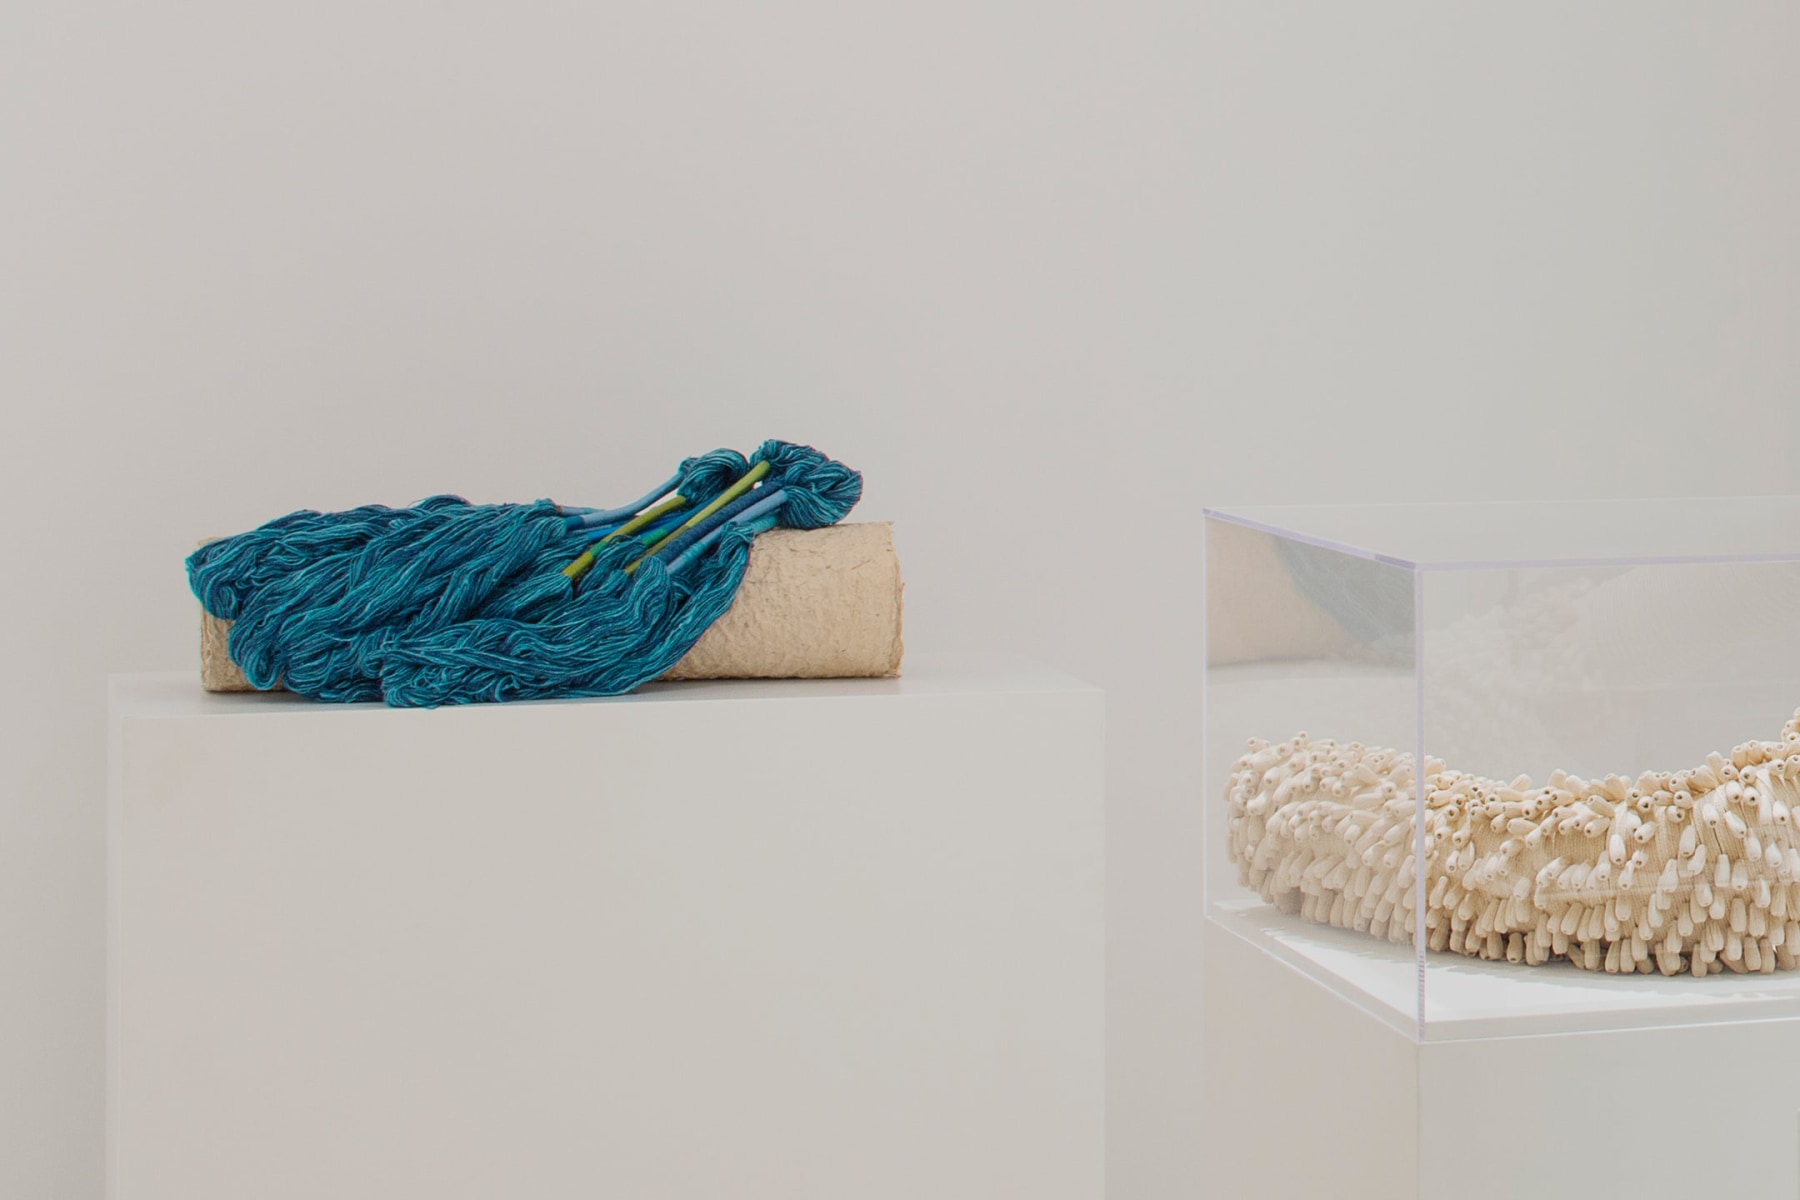 Installation view of Sheila Hicks, Line by Line, Step by Step, June 10 &ndash; August 17, 2019, &nbsp;